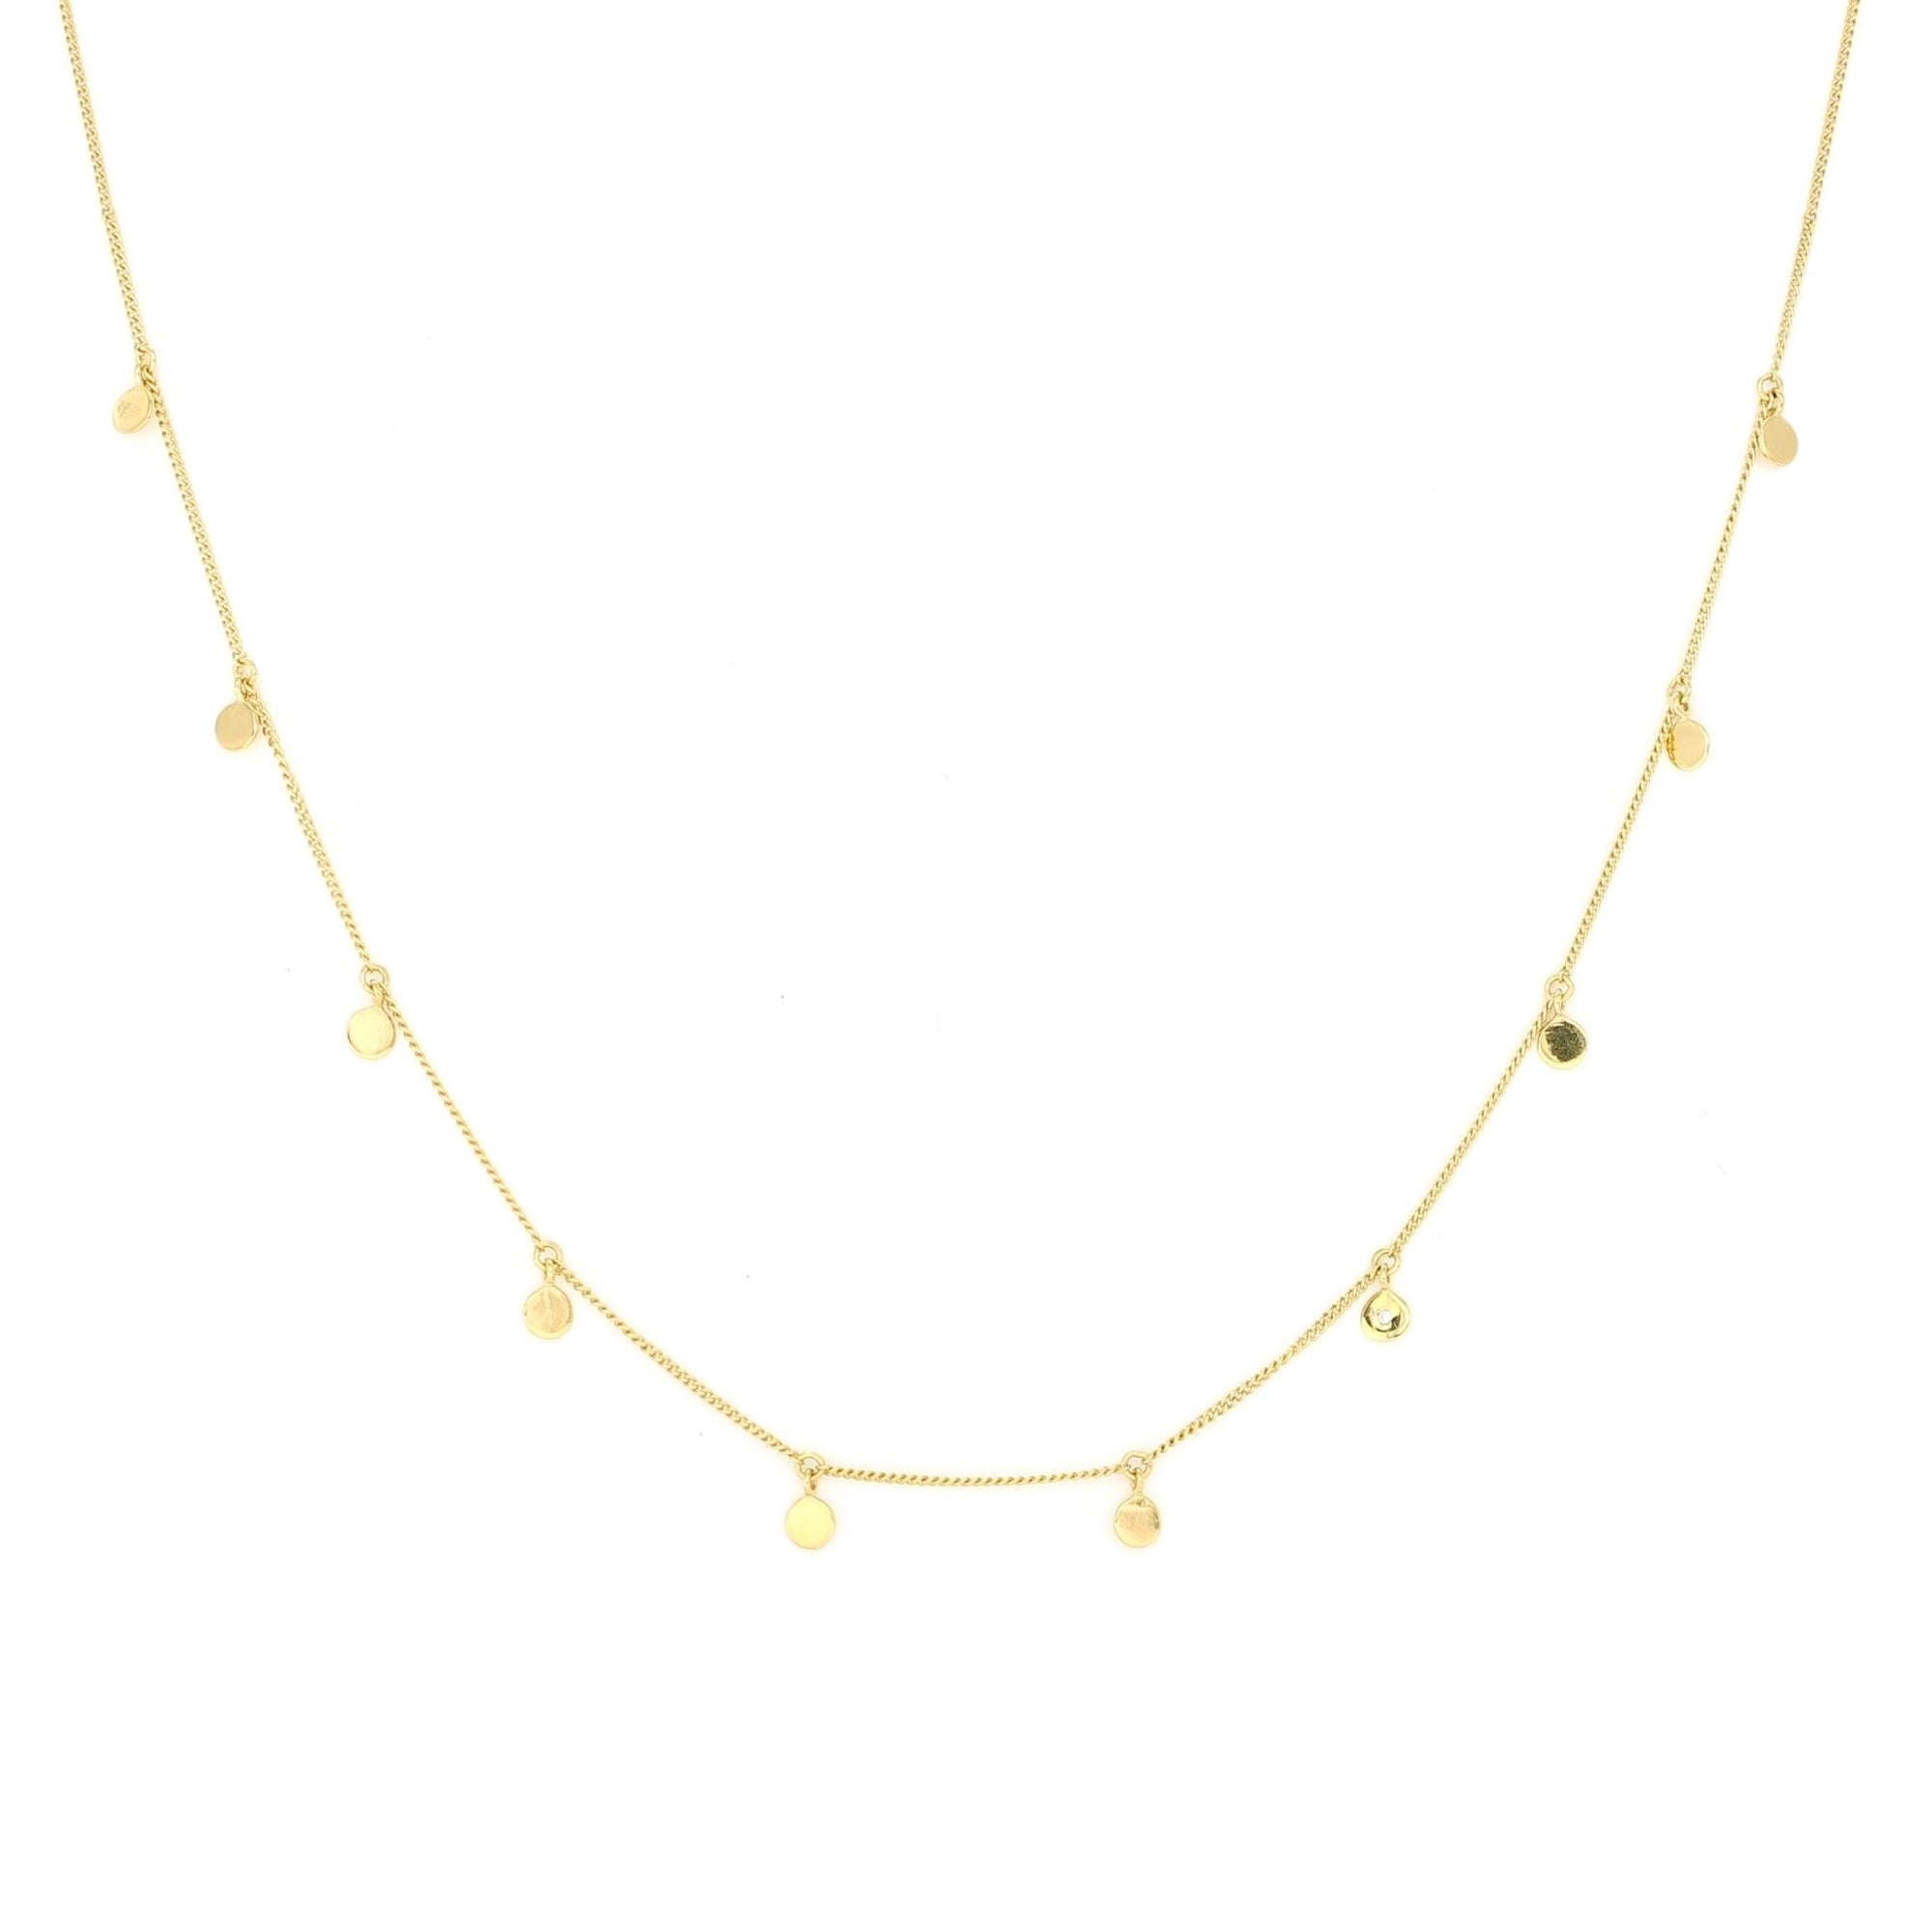 DAINTY POISE DISK NECKLACE - SOLID 14K GOLD - SO PRETTY CARA COTTER